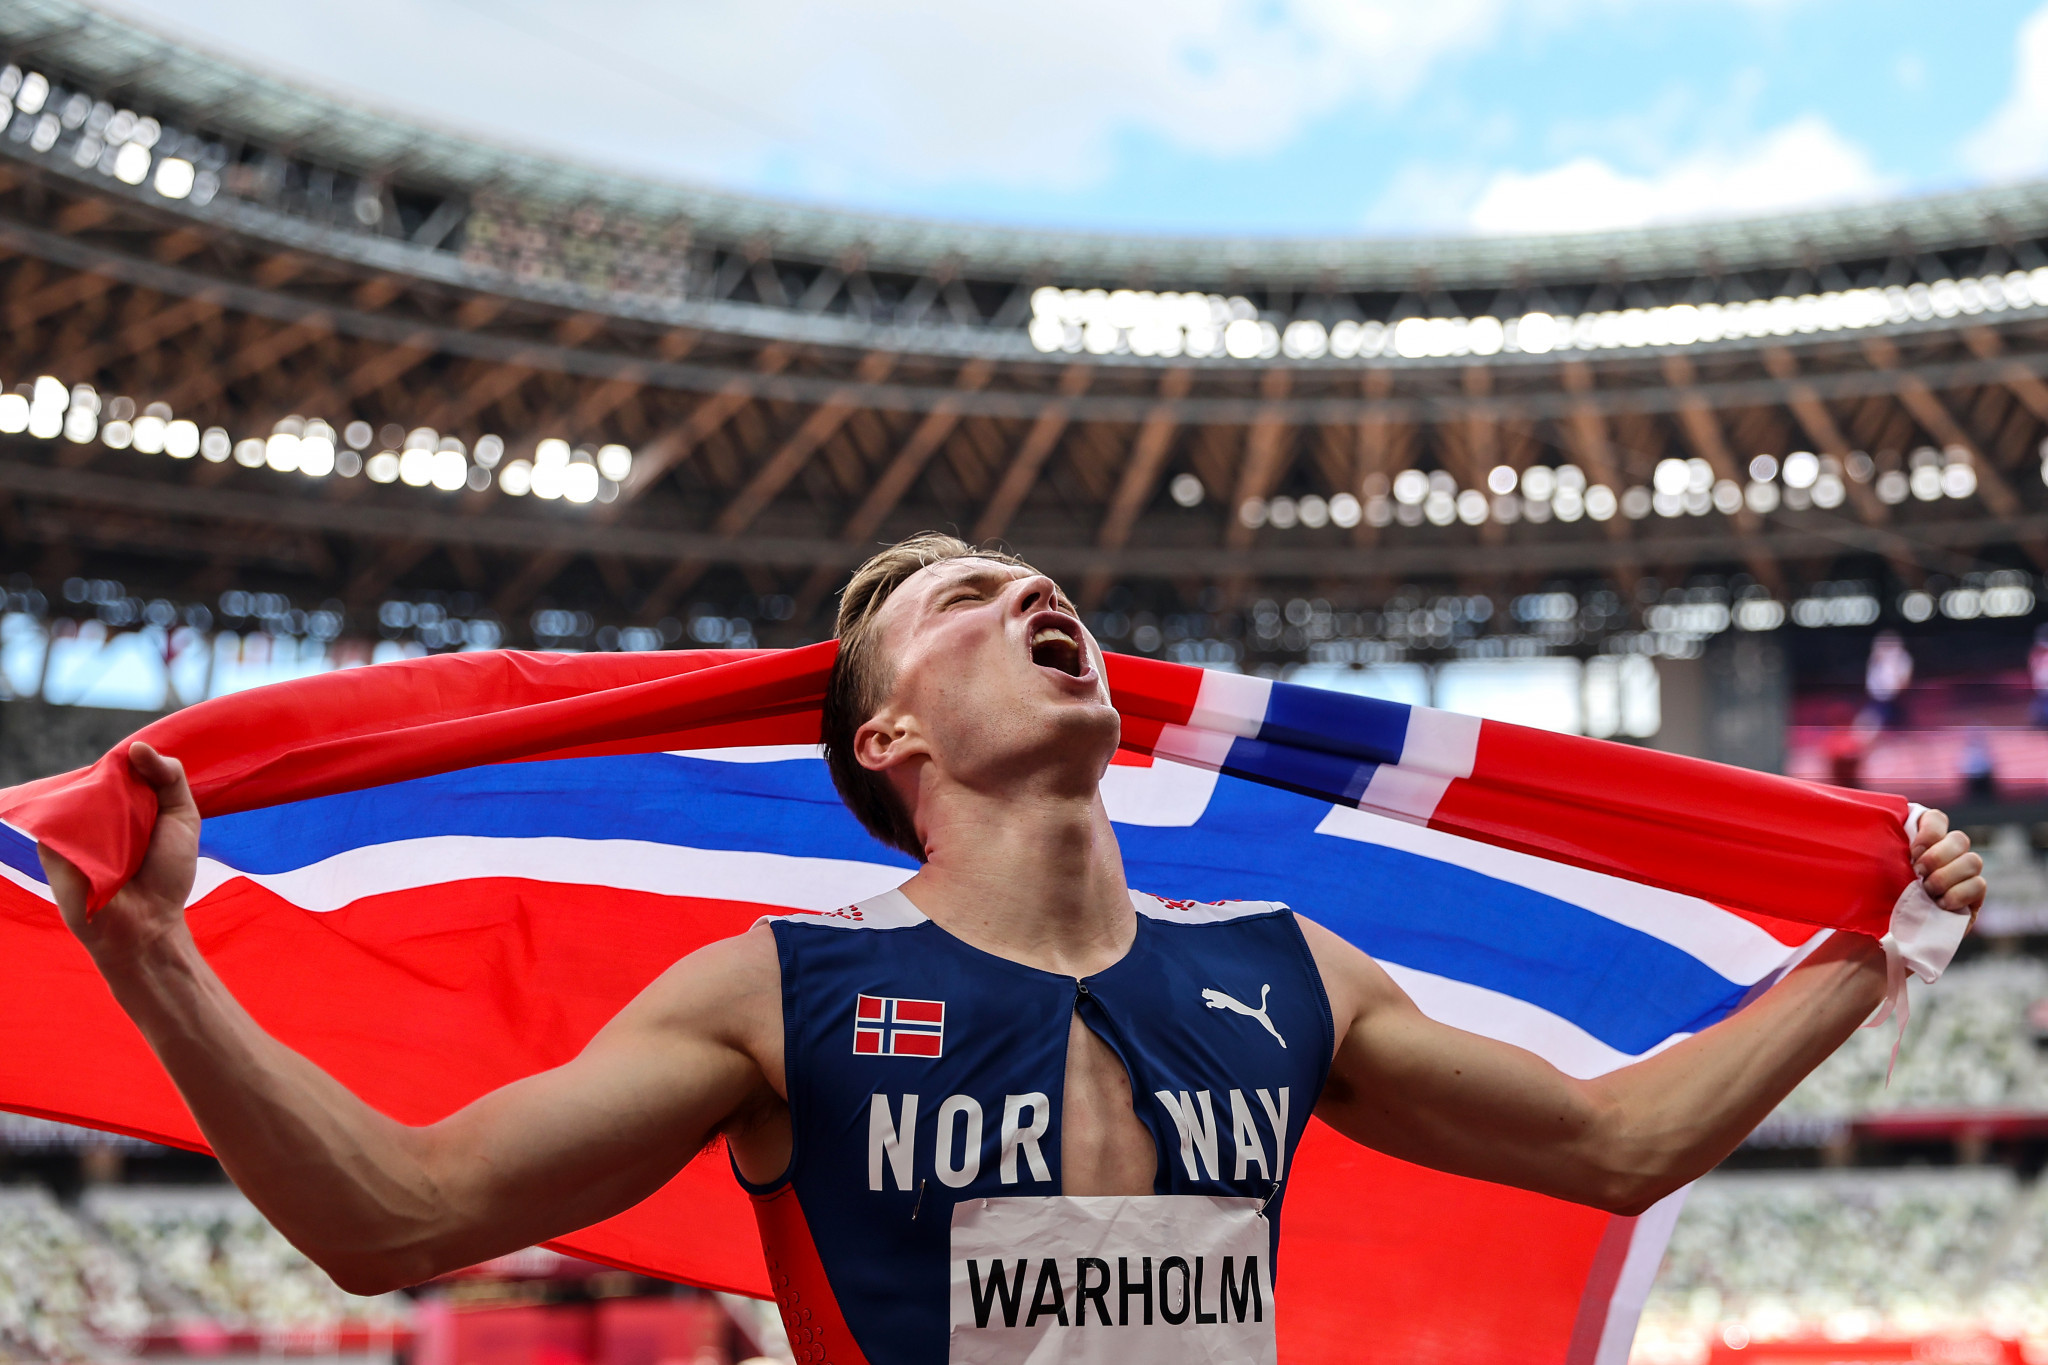 Warholm, Crouser and Kipchoge all shortlisted for Male World Athlete of the Year award